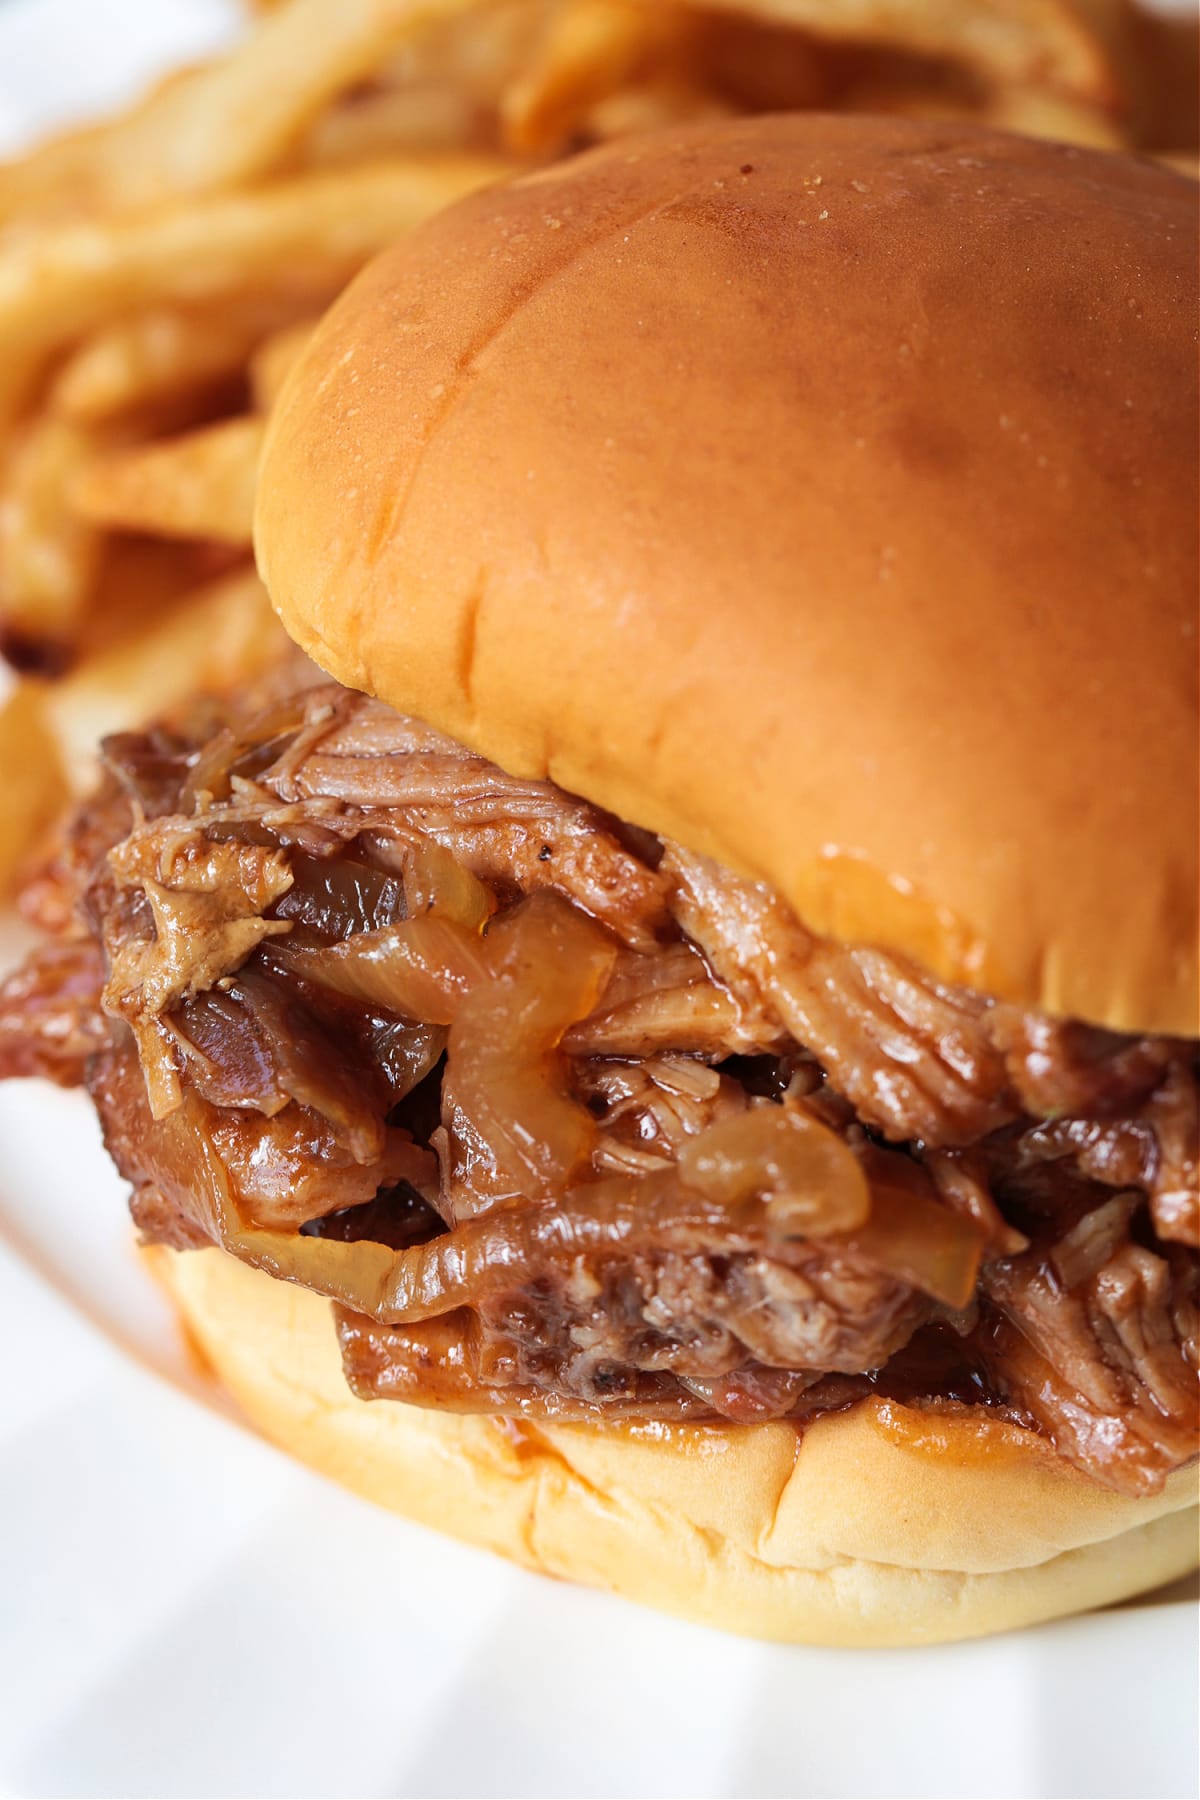 dr. pepper pulled pork sandwich with french fries